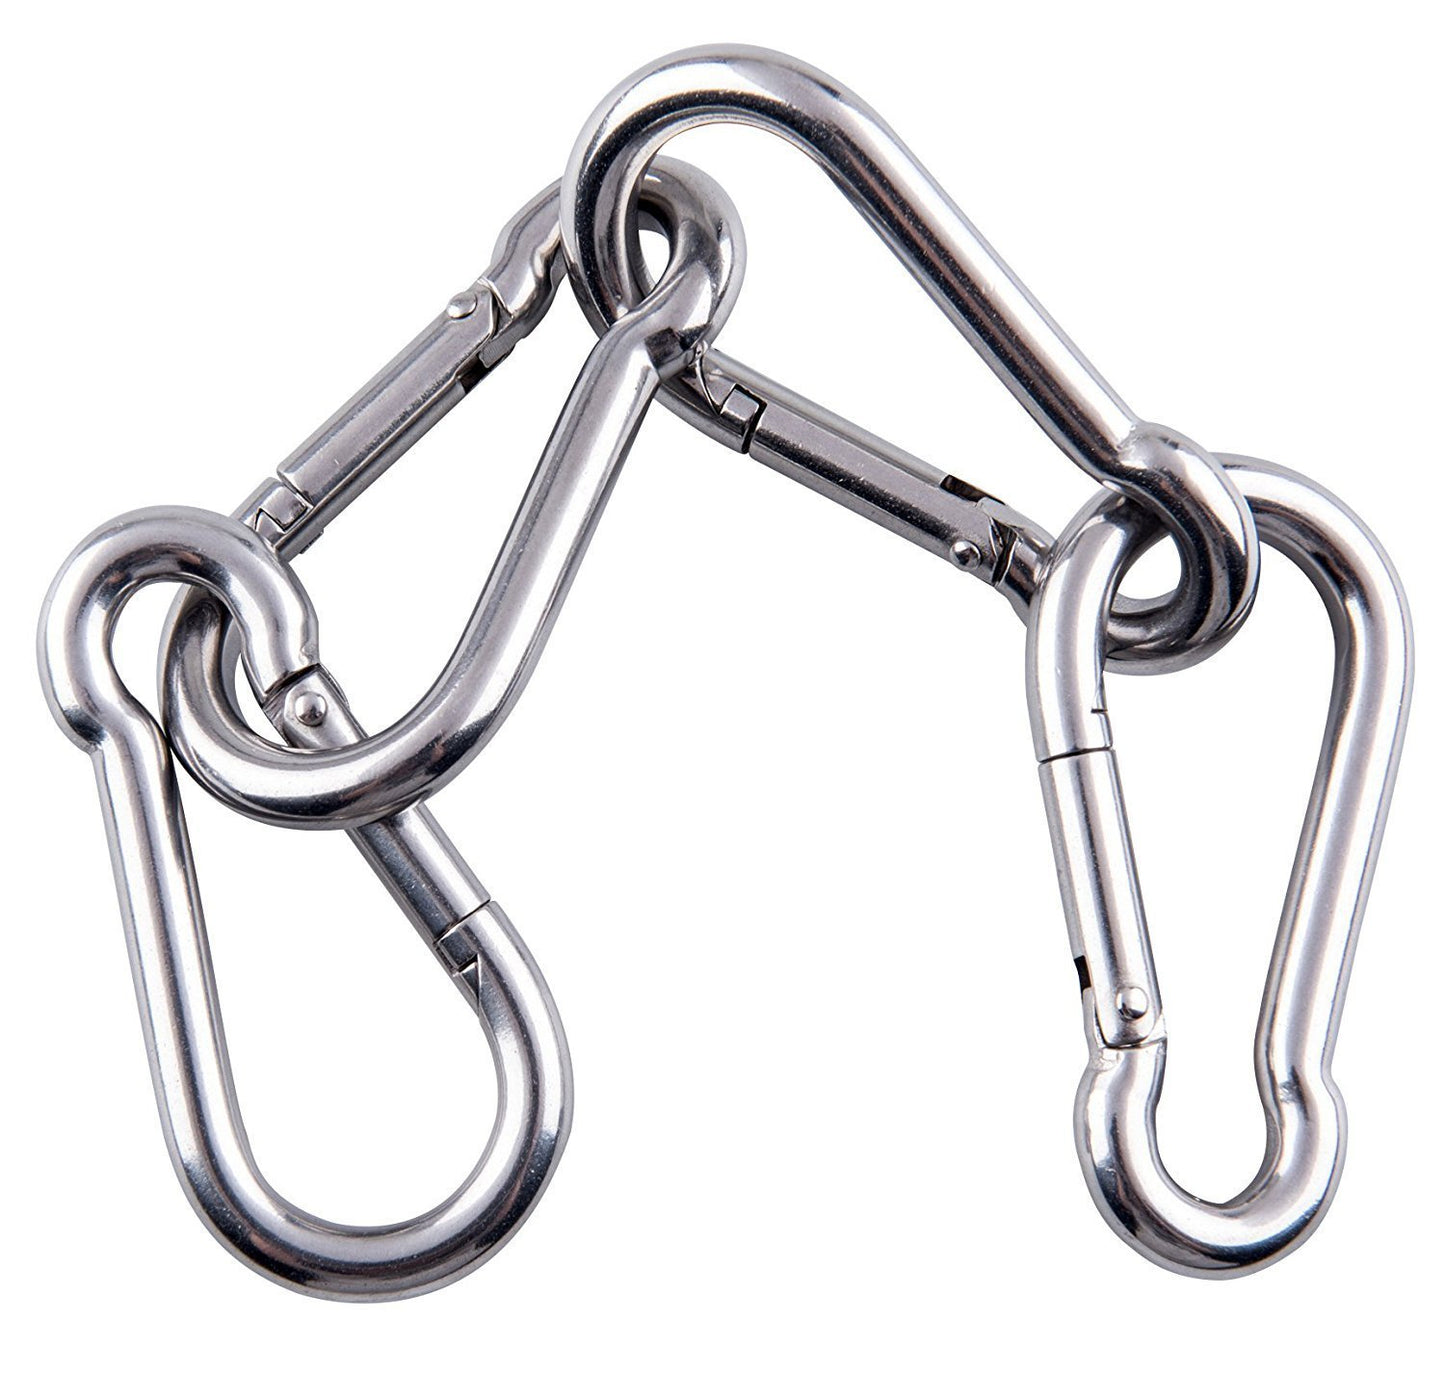 sprookber Stainless Steel Carabiner Spring Snap Hook - 304 Stainless Steel Heavy Duty Clips, Set of 4 (3.15 Inch) - Opticdeals